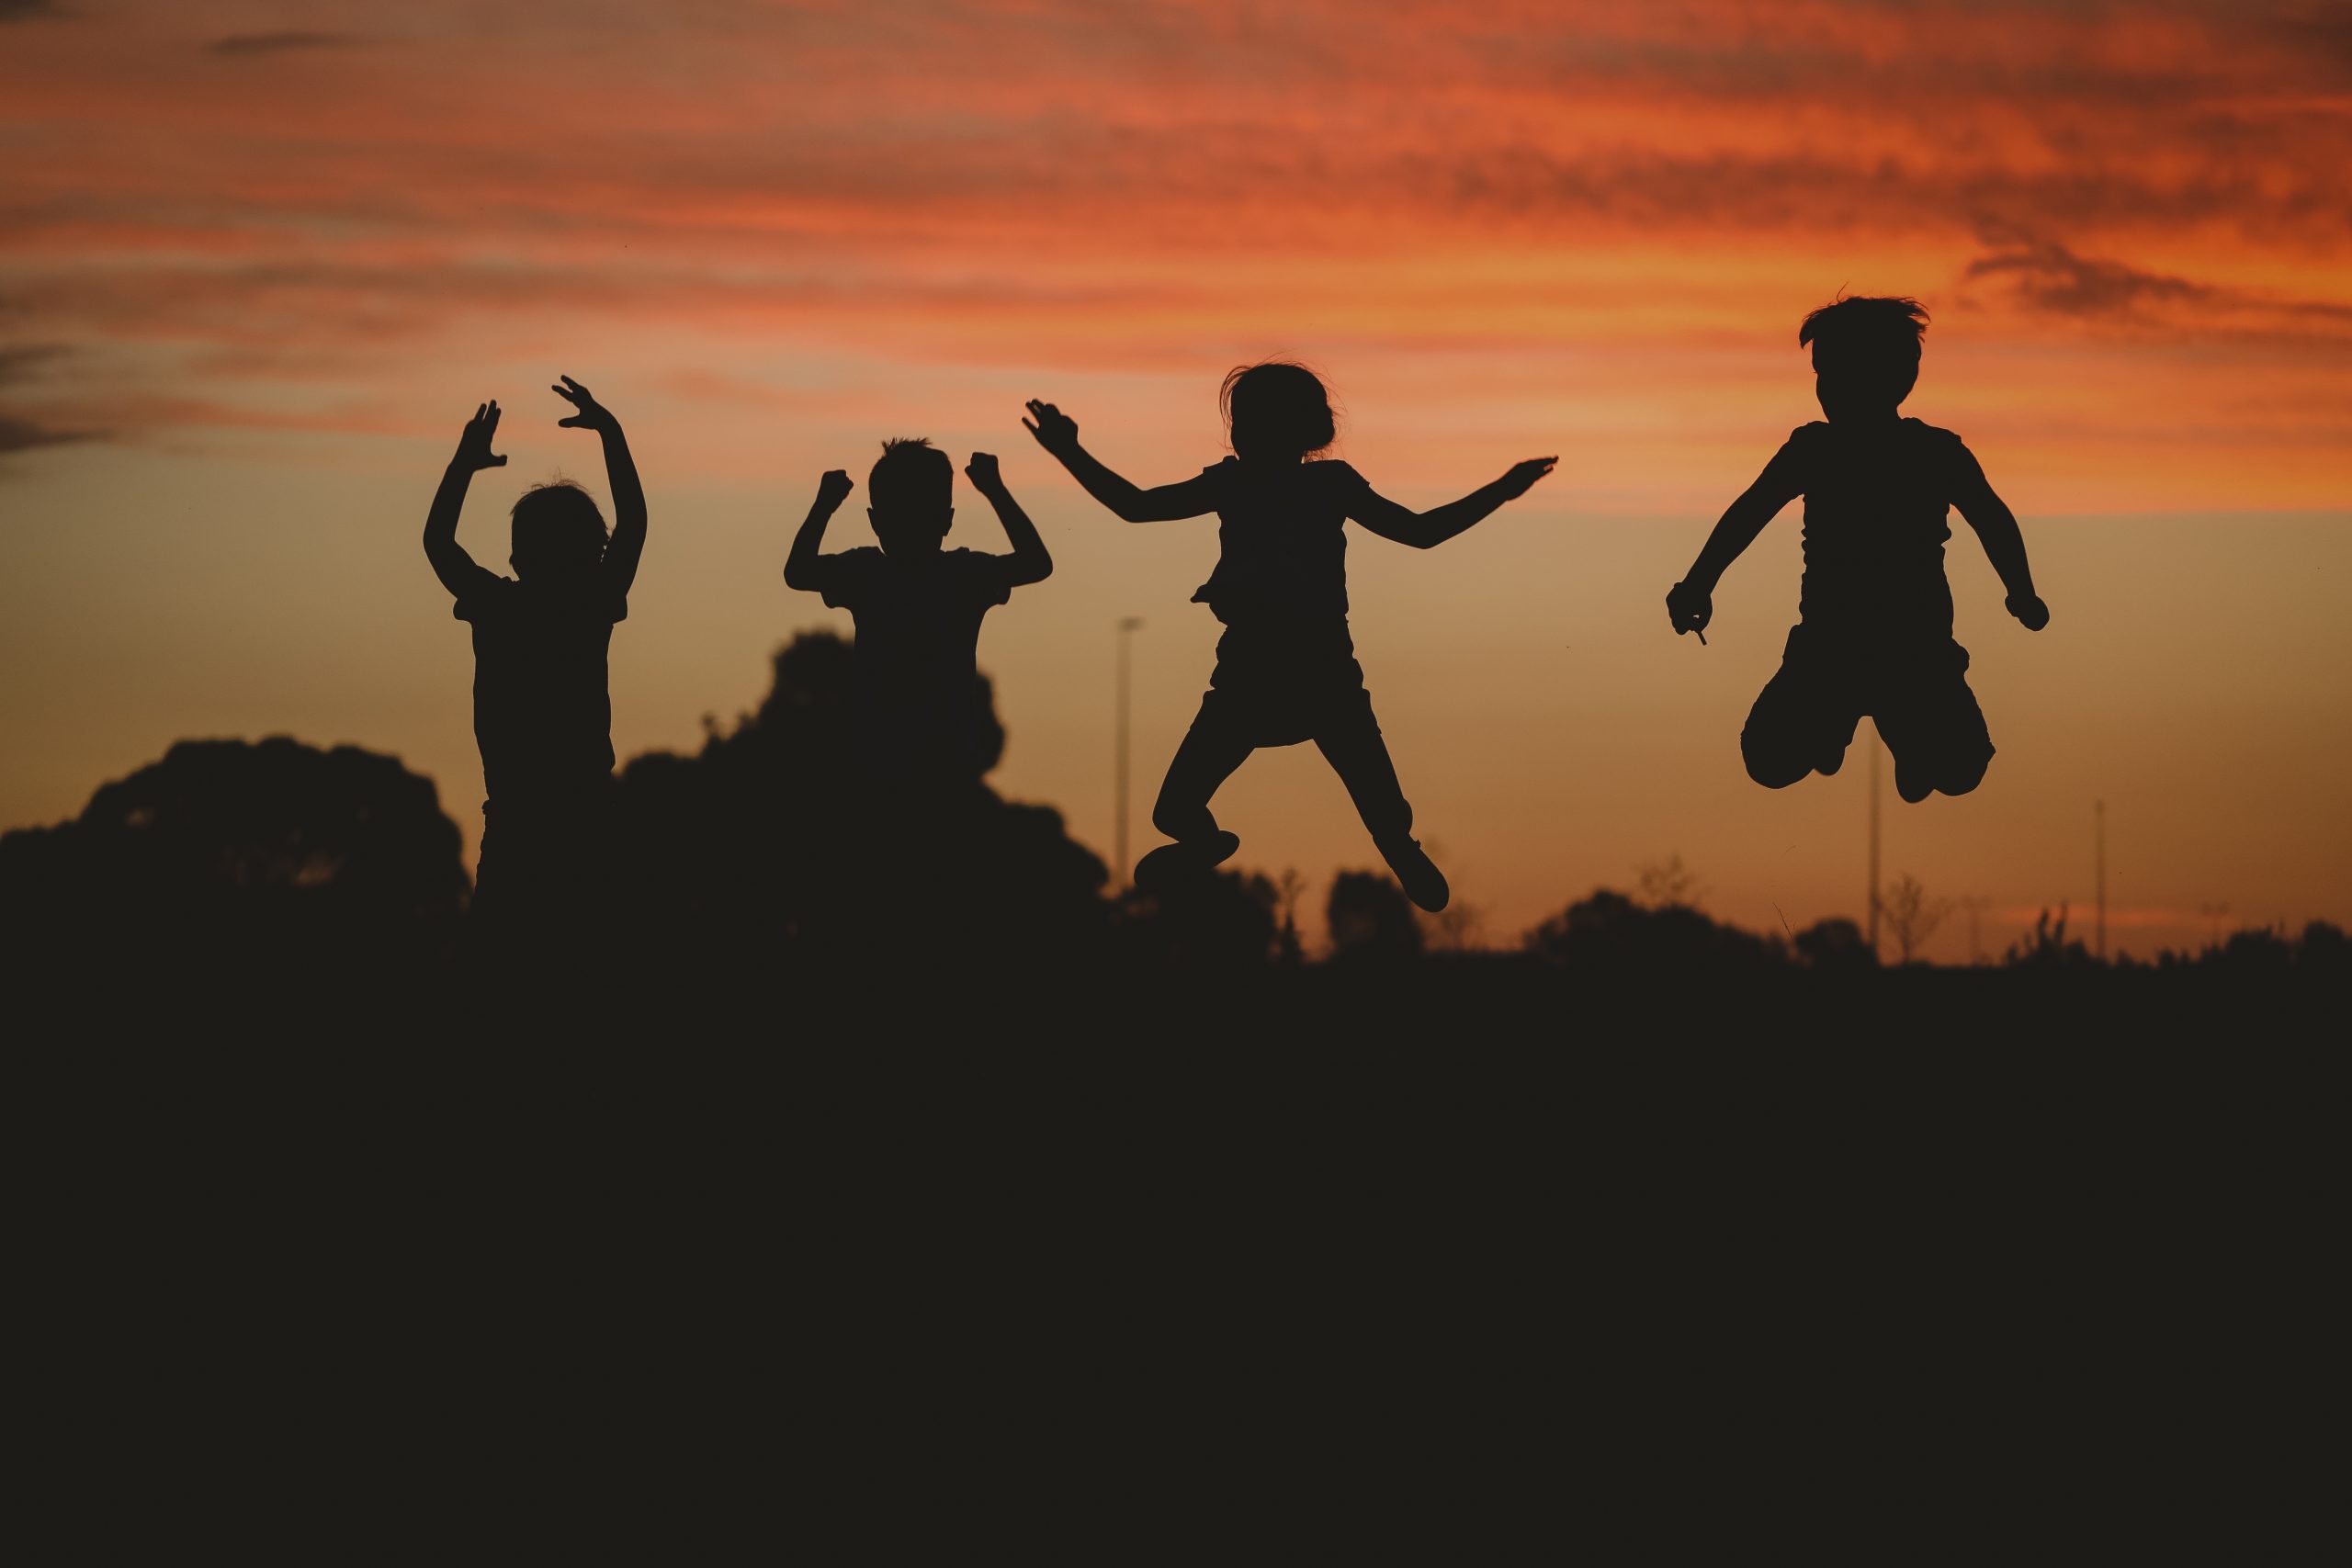 The silhouette of children posing on the hill surrounded by greenery during a golden sunset